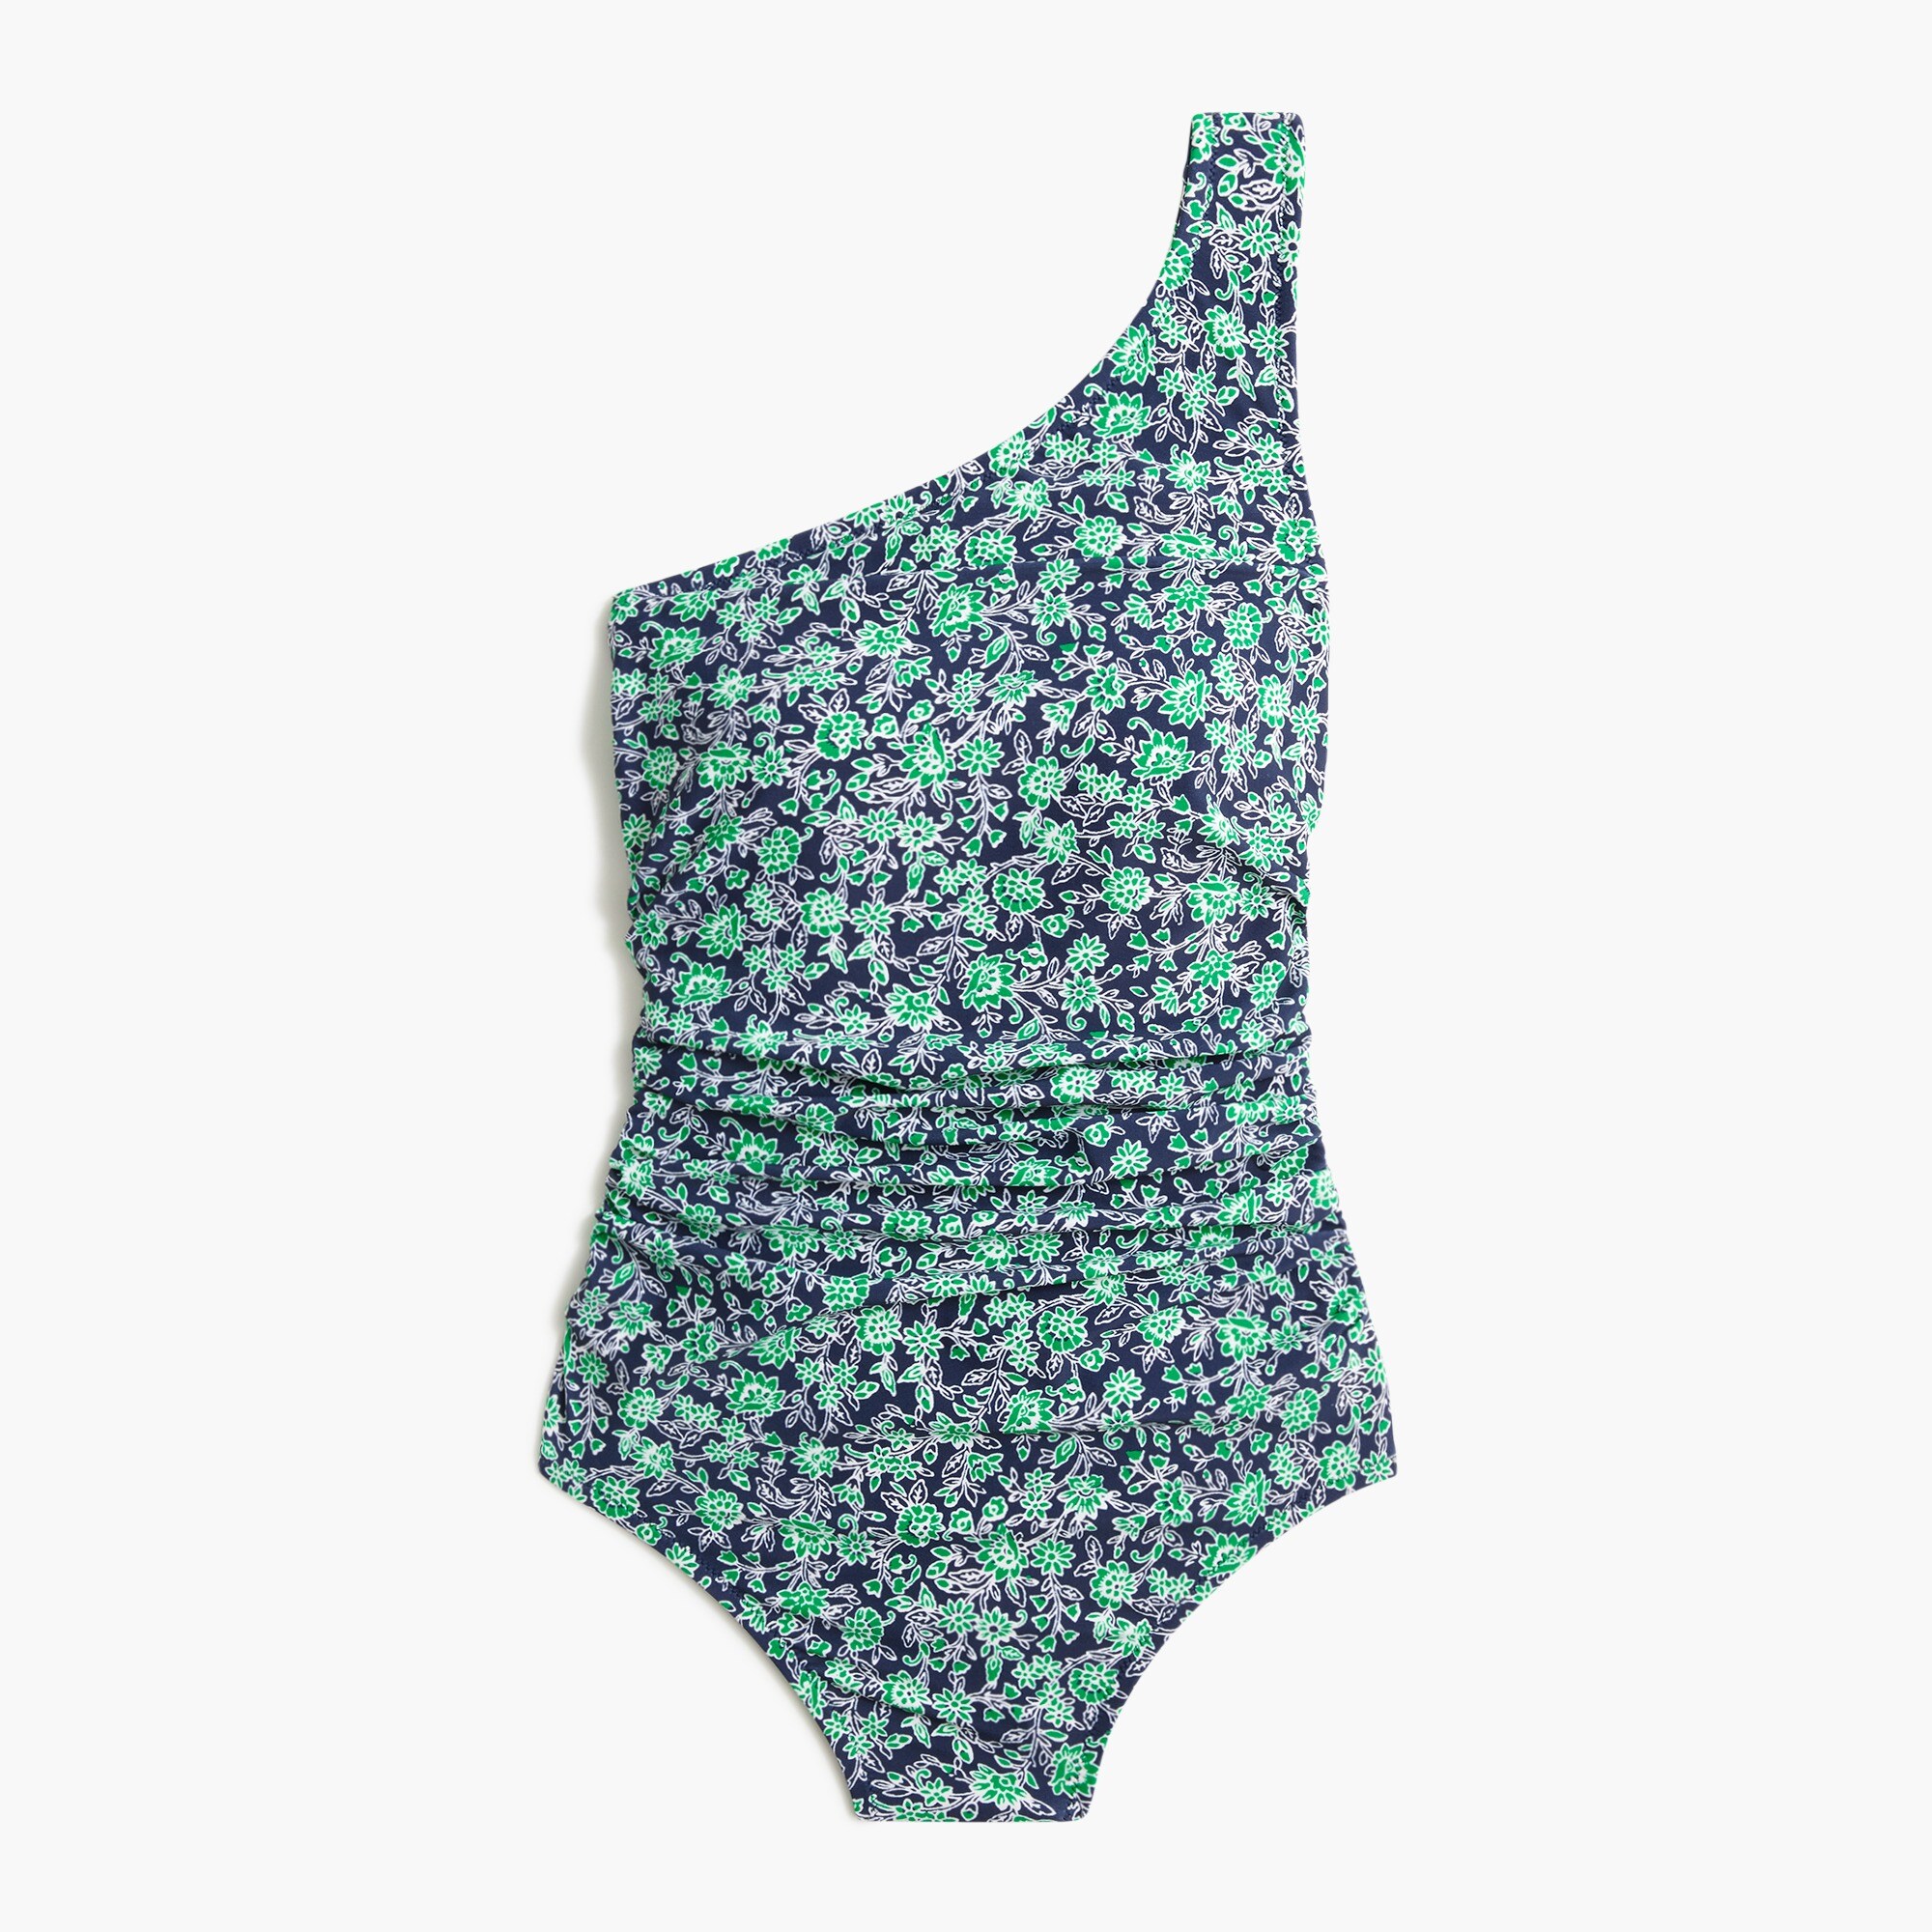  Floral ruched one-shoulder swimsuit